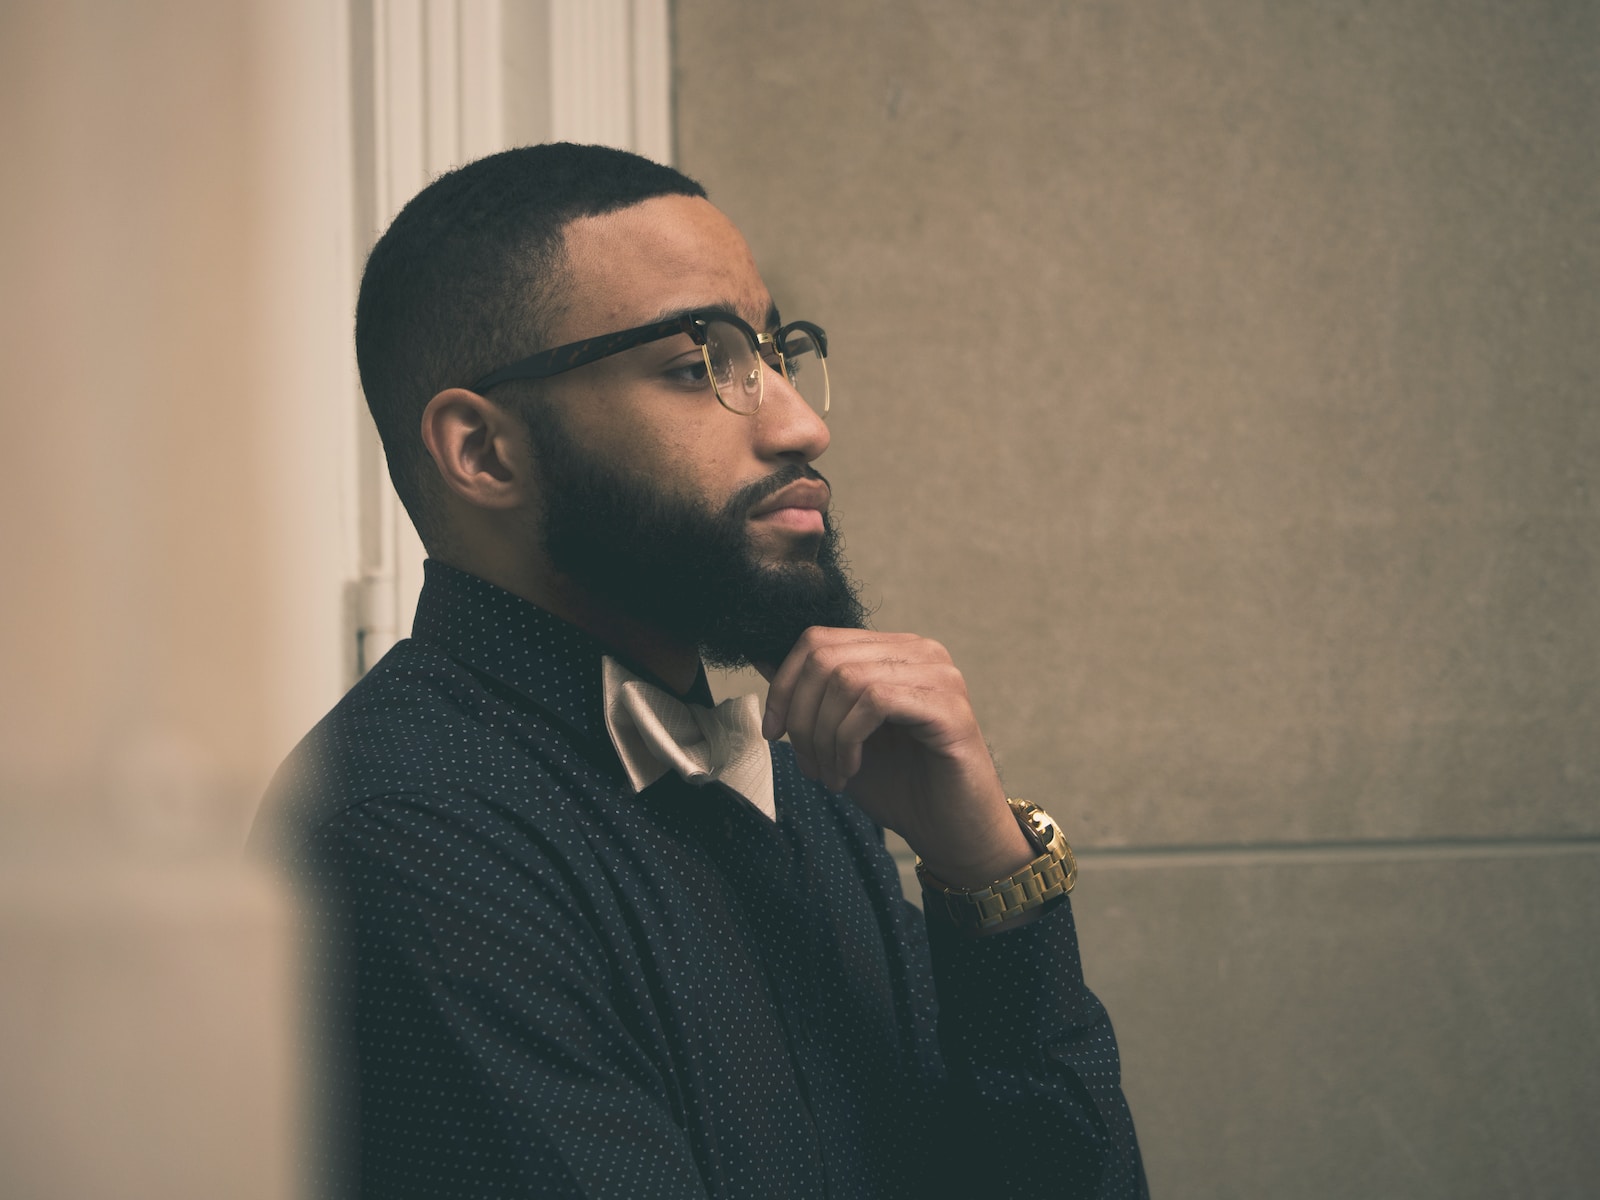 a man with a beard and glasses looking off into the distance